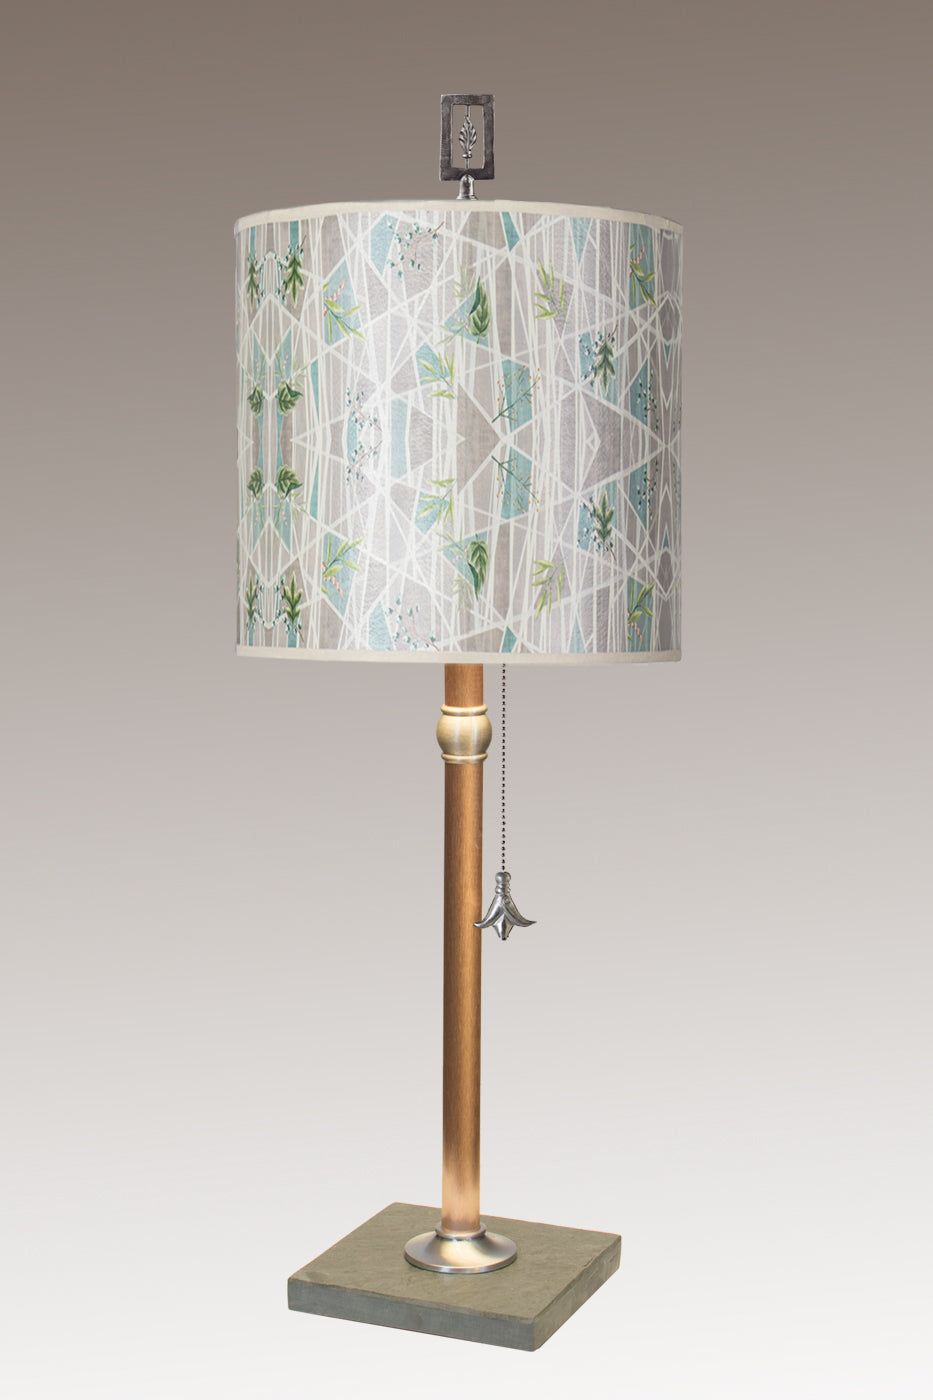 Copper Table Lamp with Medium Drum Shade in Prism